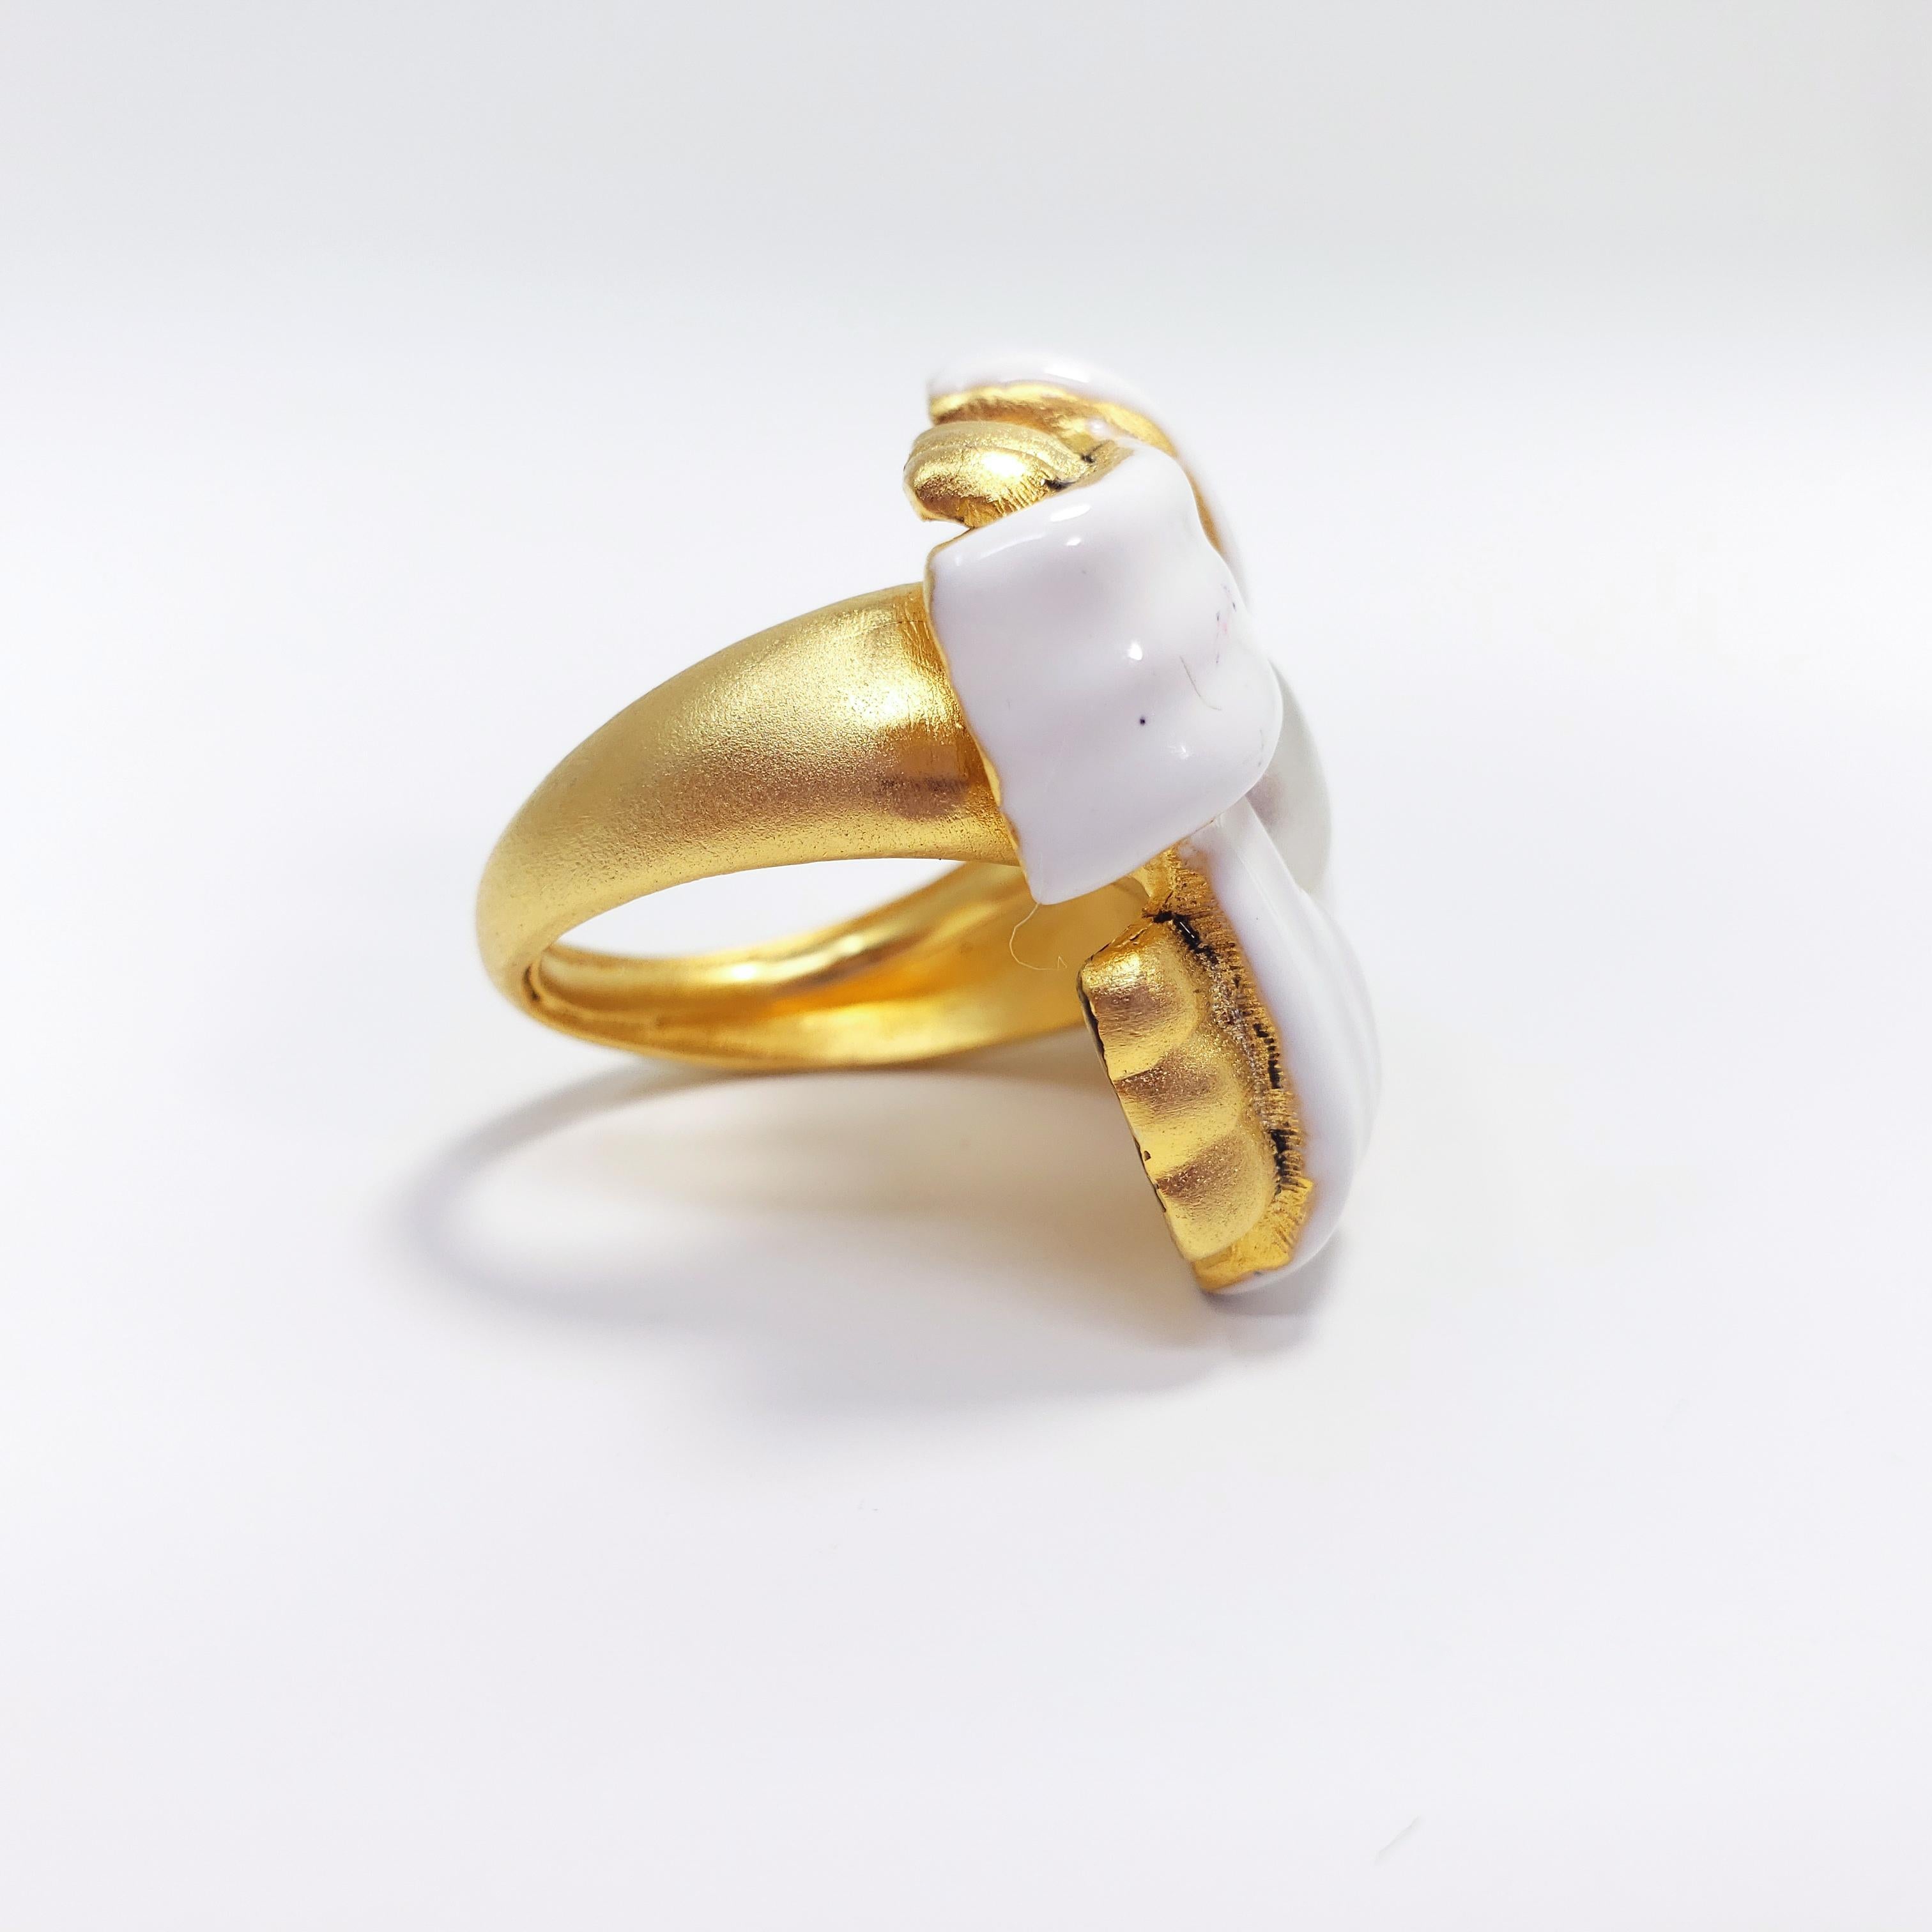 A goldtone Kenneth Jay Lane cocktail ring featuring intertwined ribbon motifs painted with white enamel, accented with a centerpiece faux pearl.

Size: Adjustable, US sizes 4-8
Face height 3.2 cm
Hallmarks: Kenneth © Lane